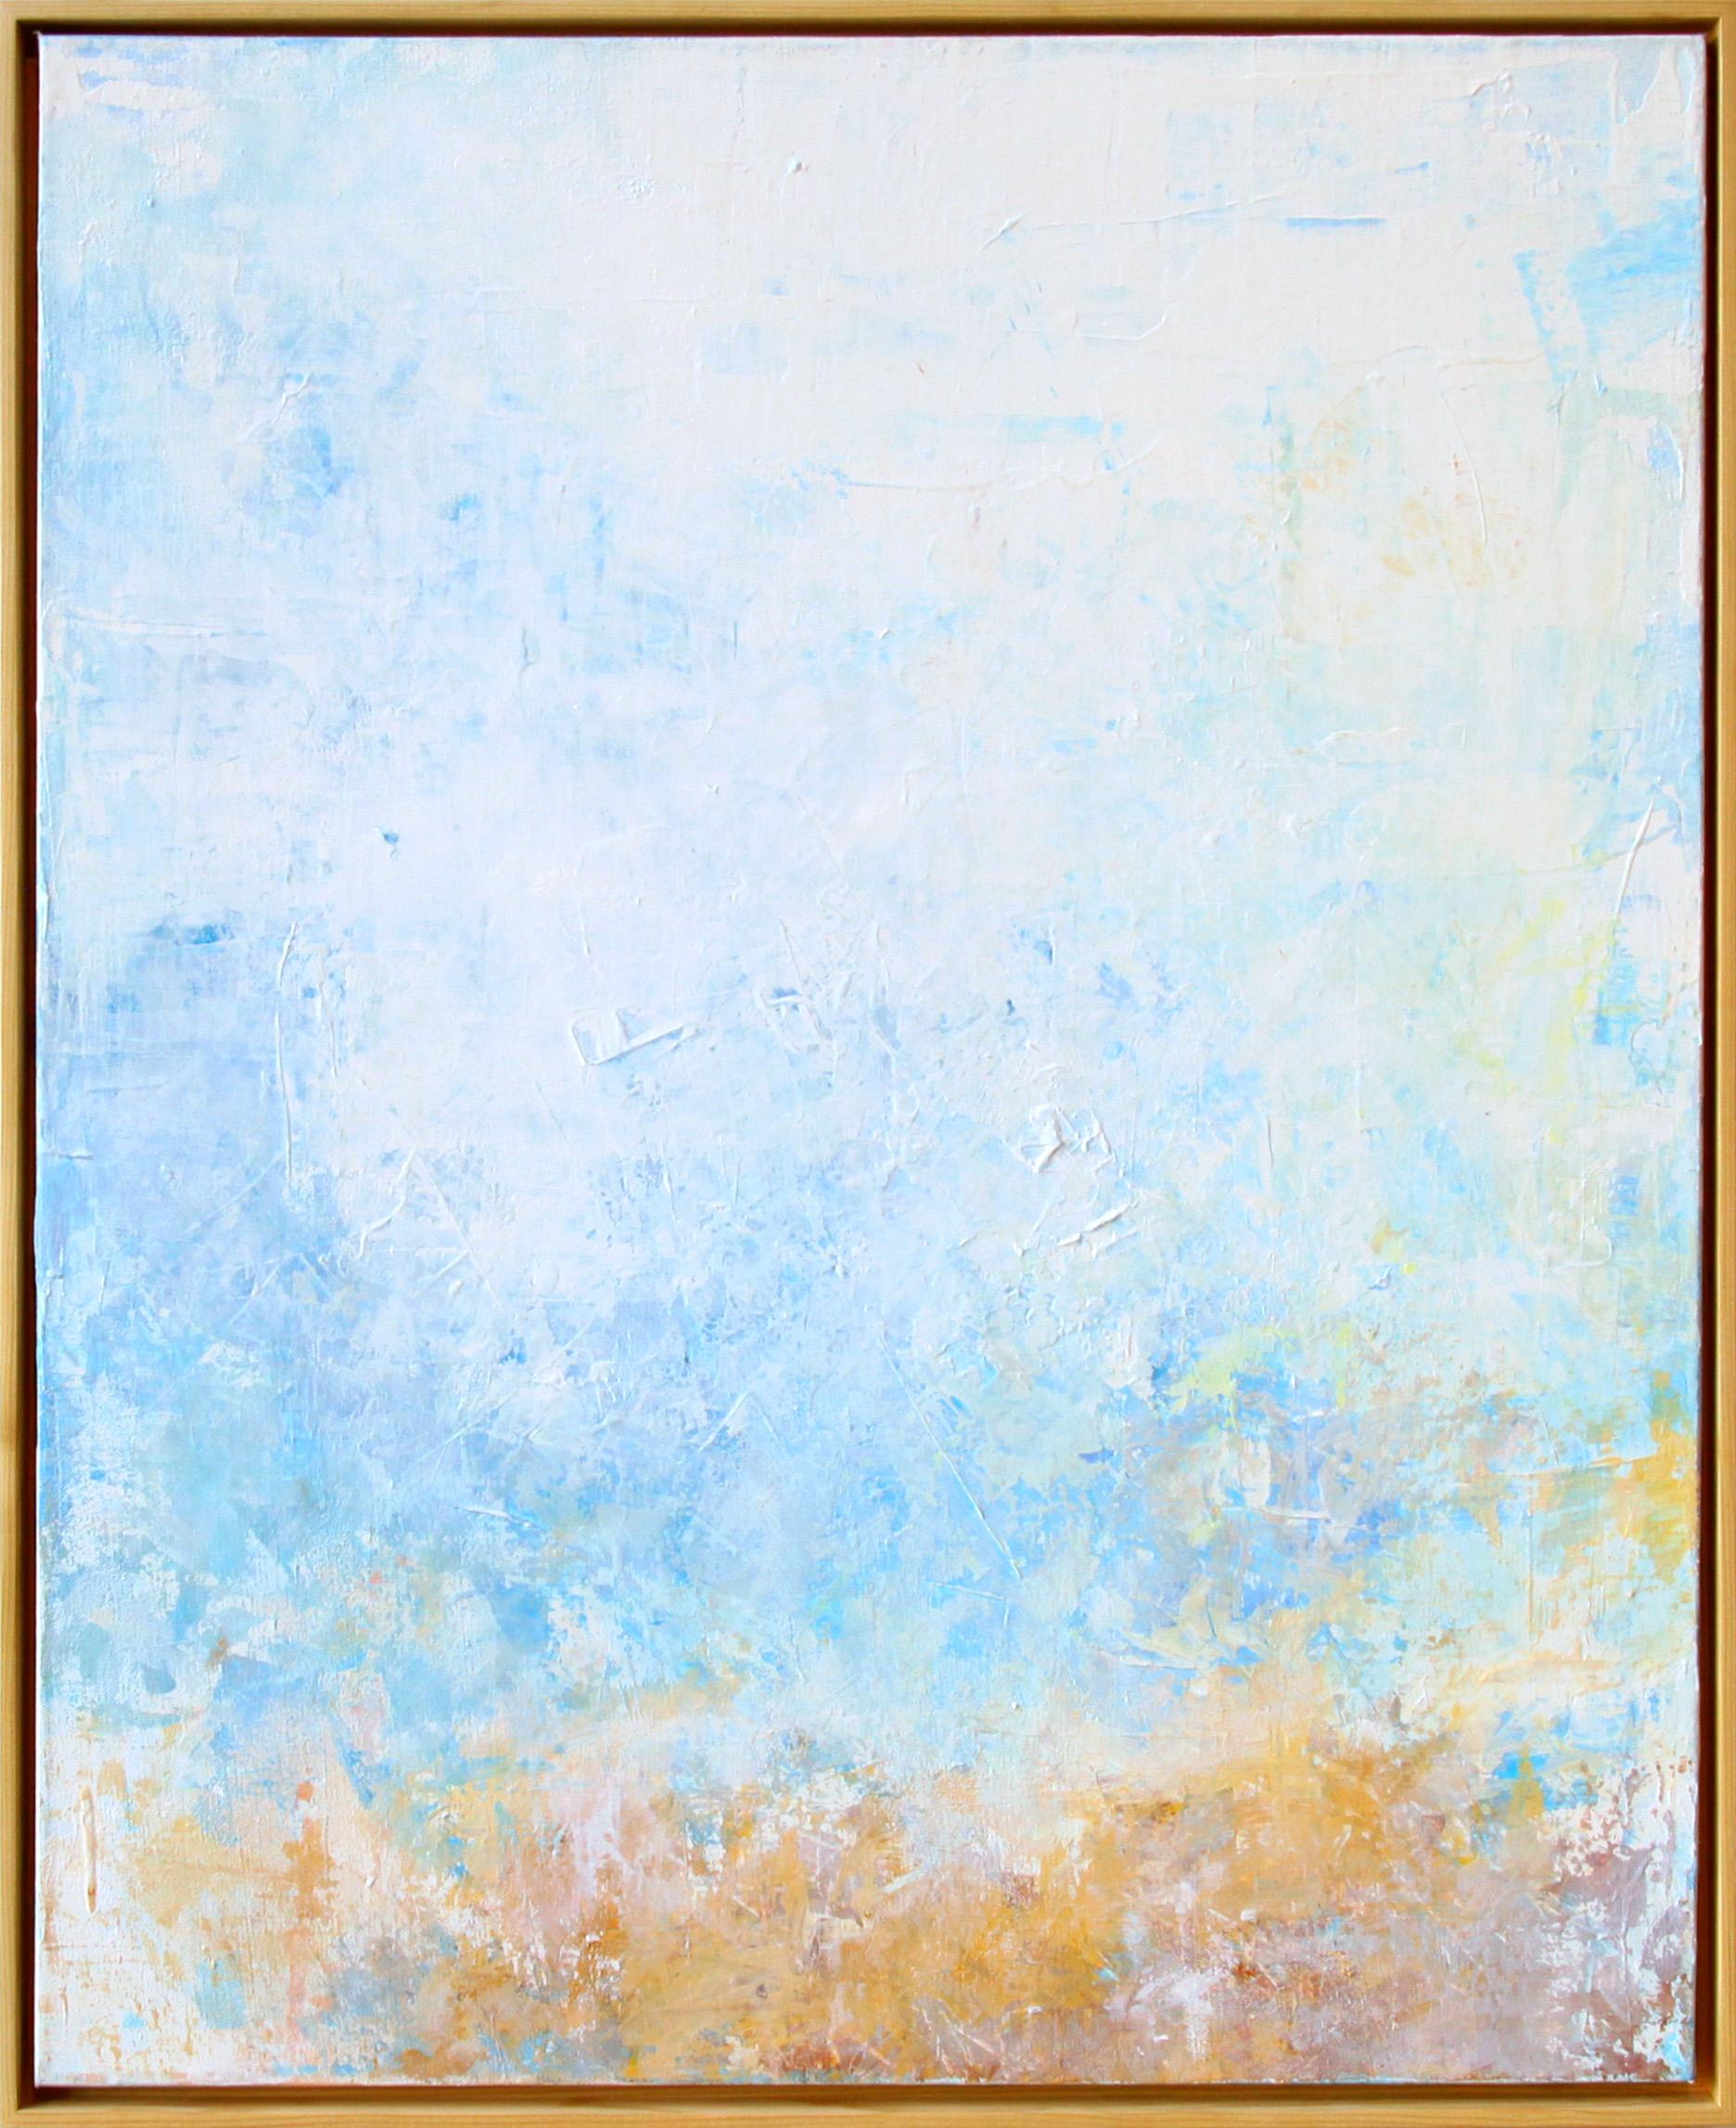 Stefanie Bales Abstract Painting - An Abstract Acrylic on Canvas Painting, "A Day at the Beach"